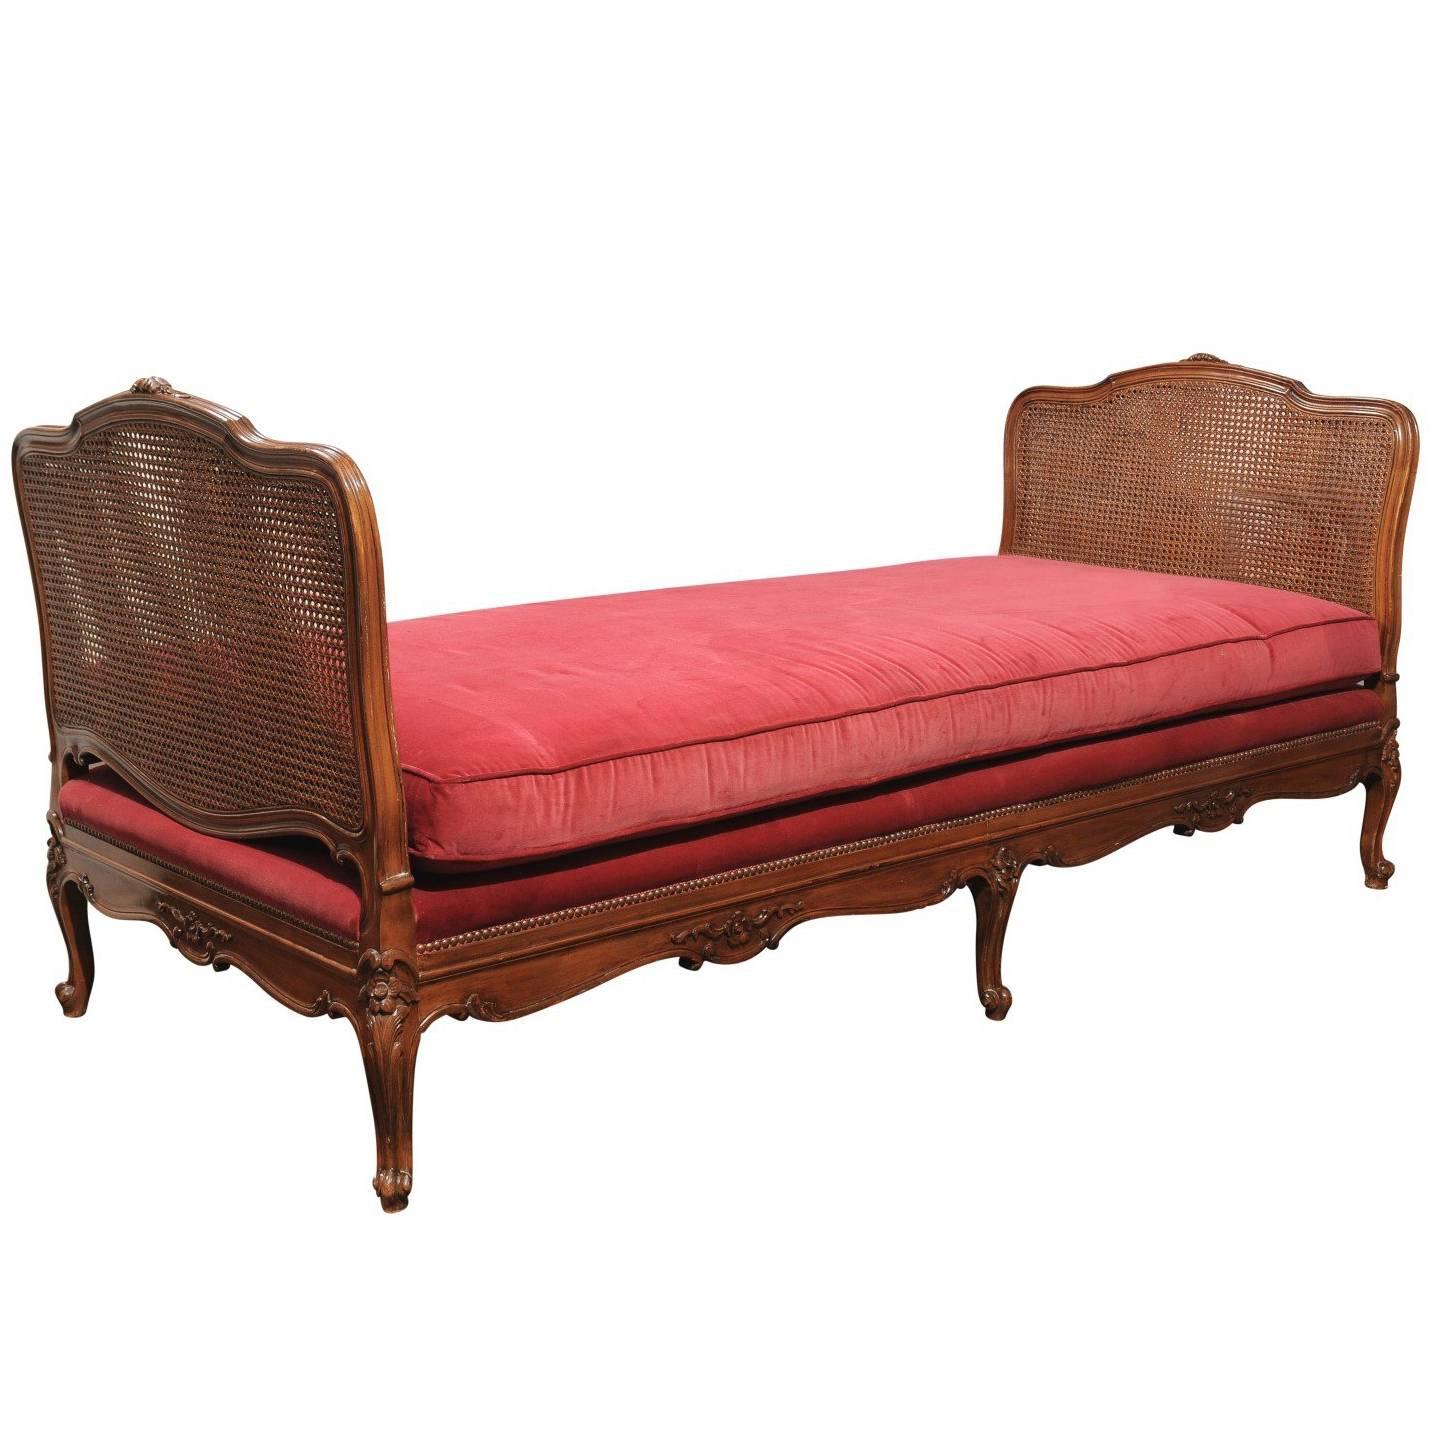 19th Century Cane and Walnut Daybed